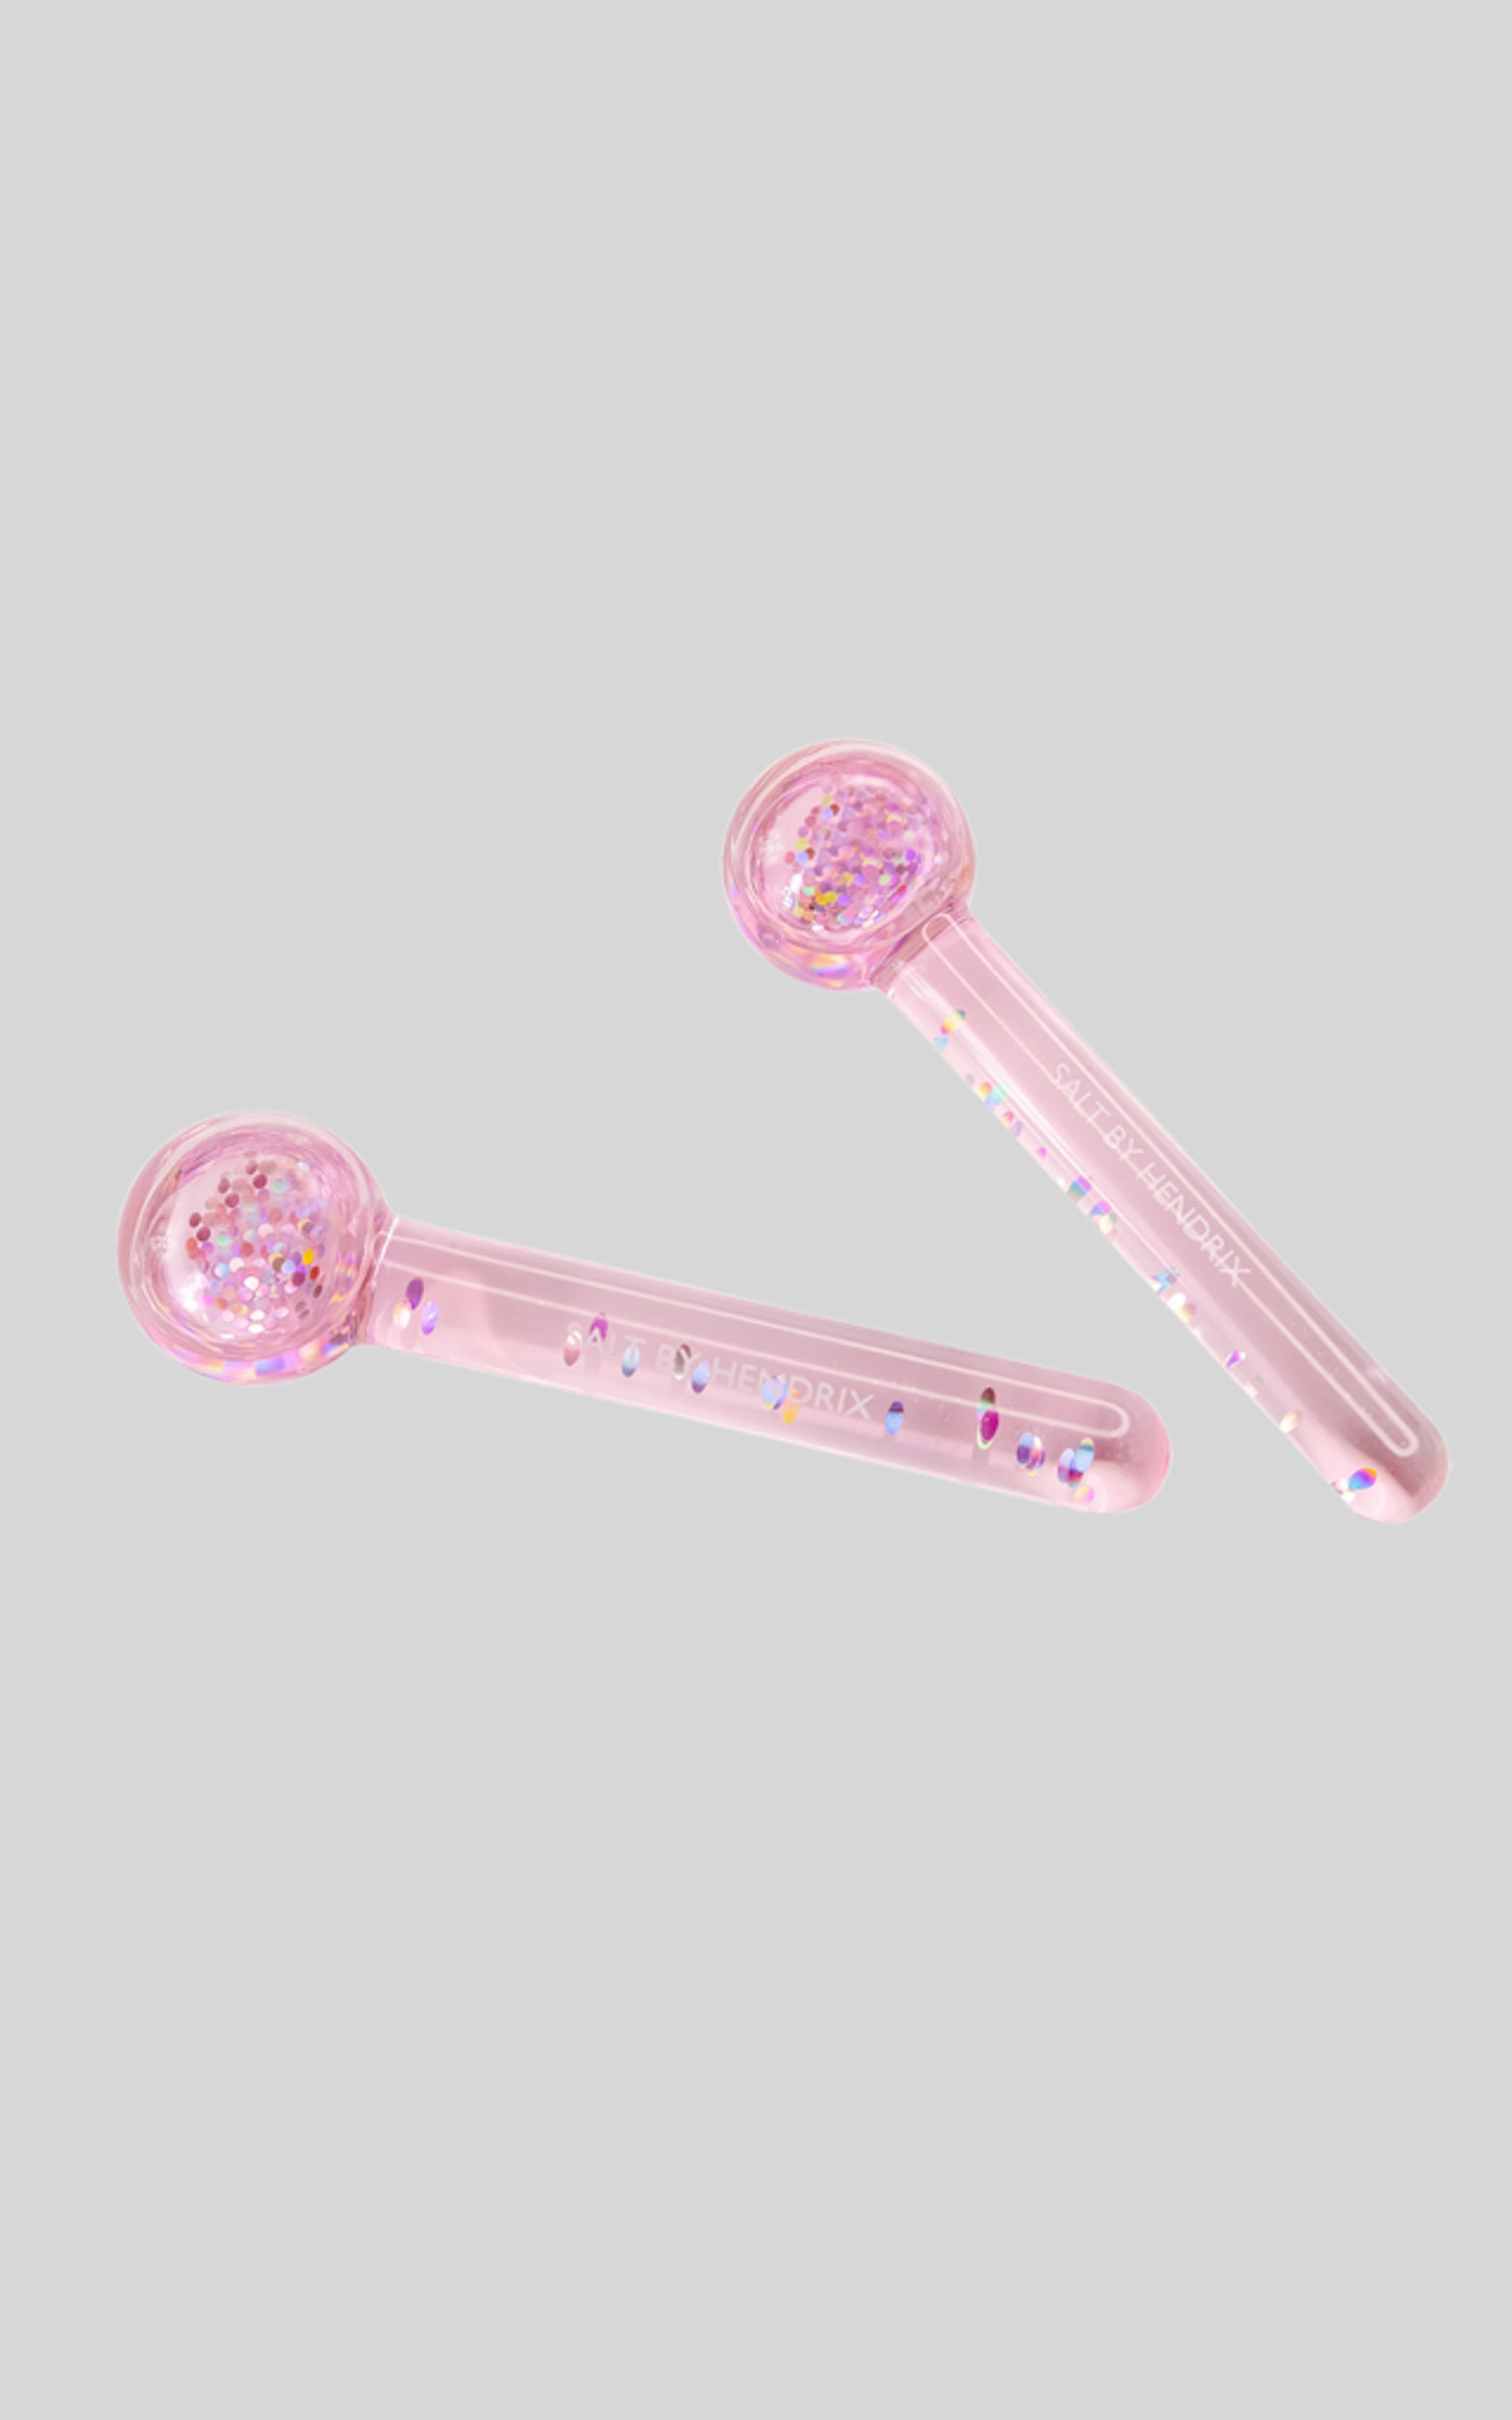 Salt By Hendrix - Glow Dust Massage Tools in Pink Amethyst - NoSize, PNK1, hi-res image number null